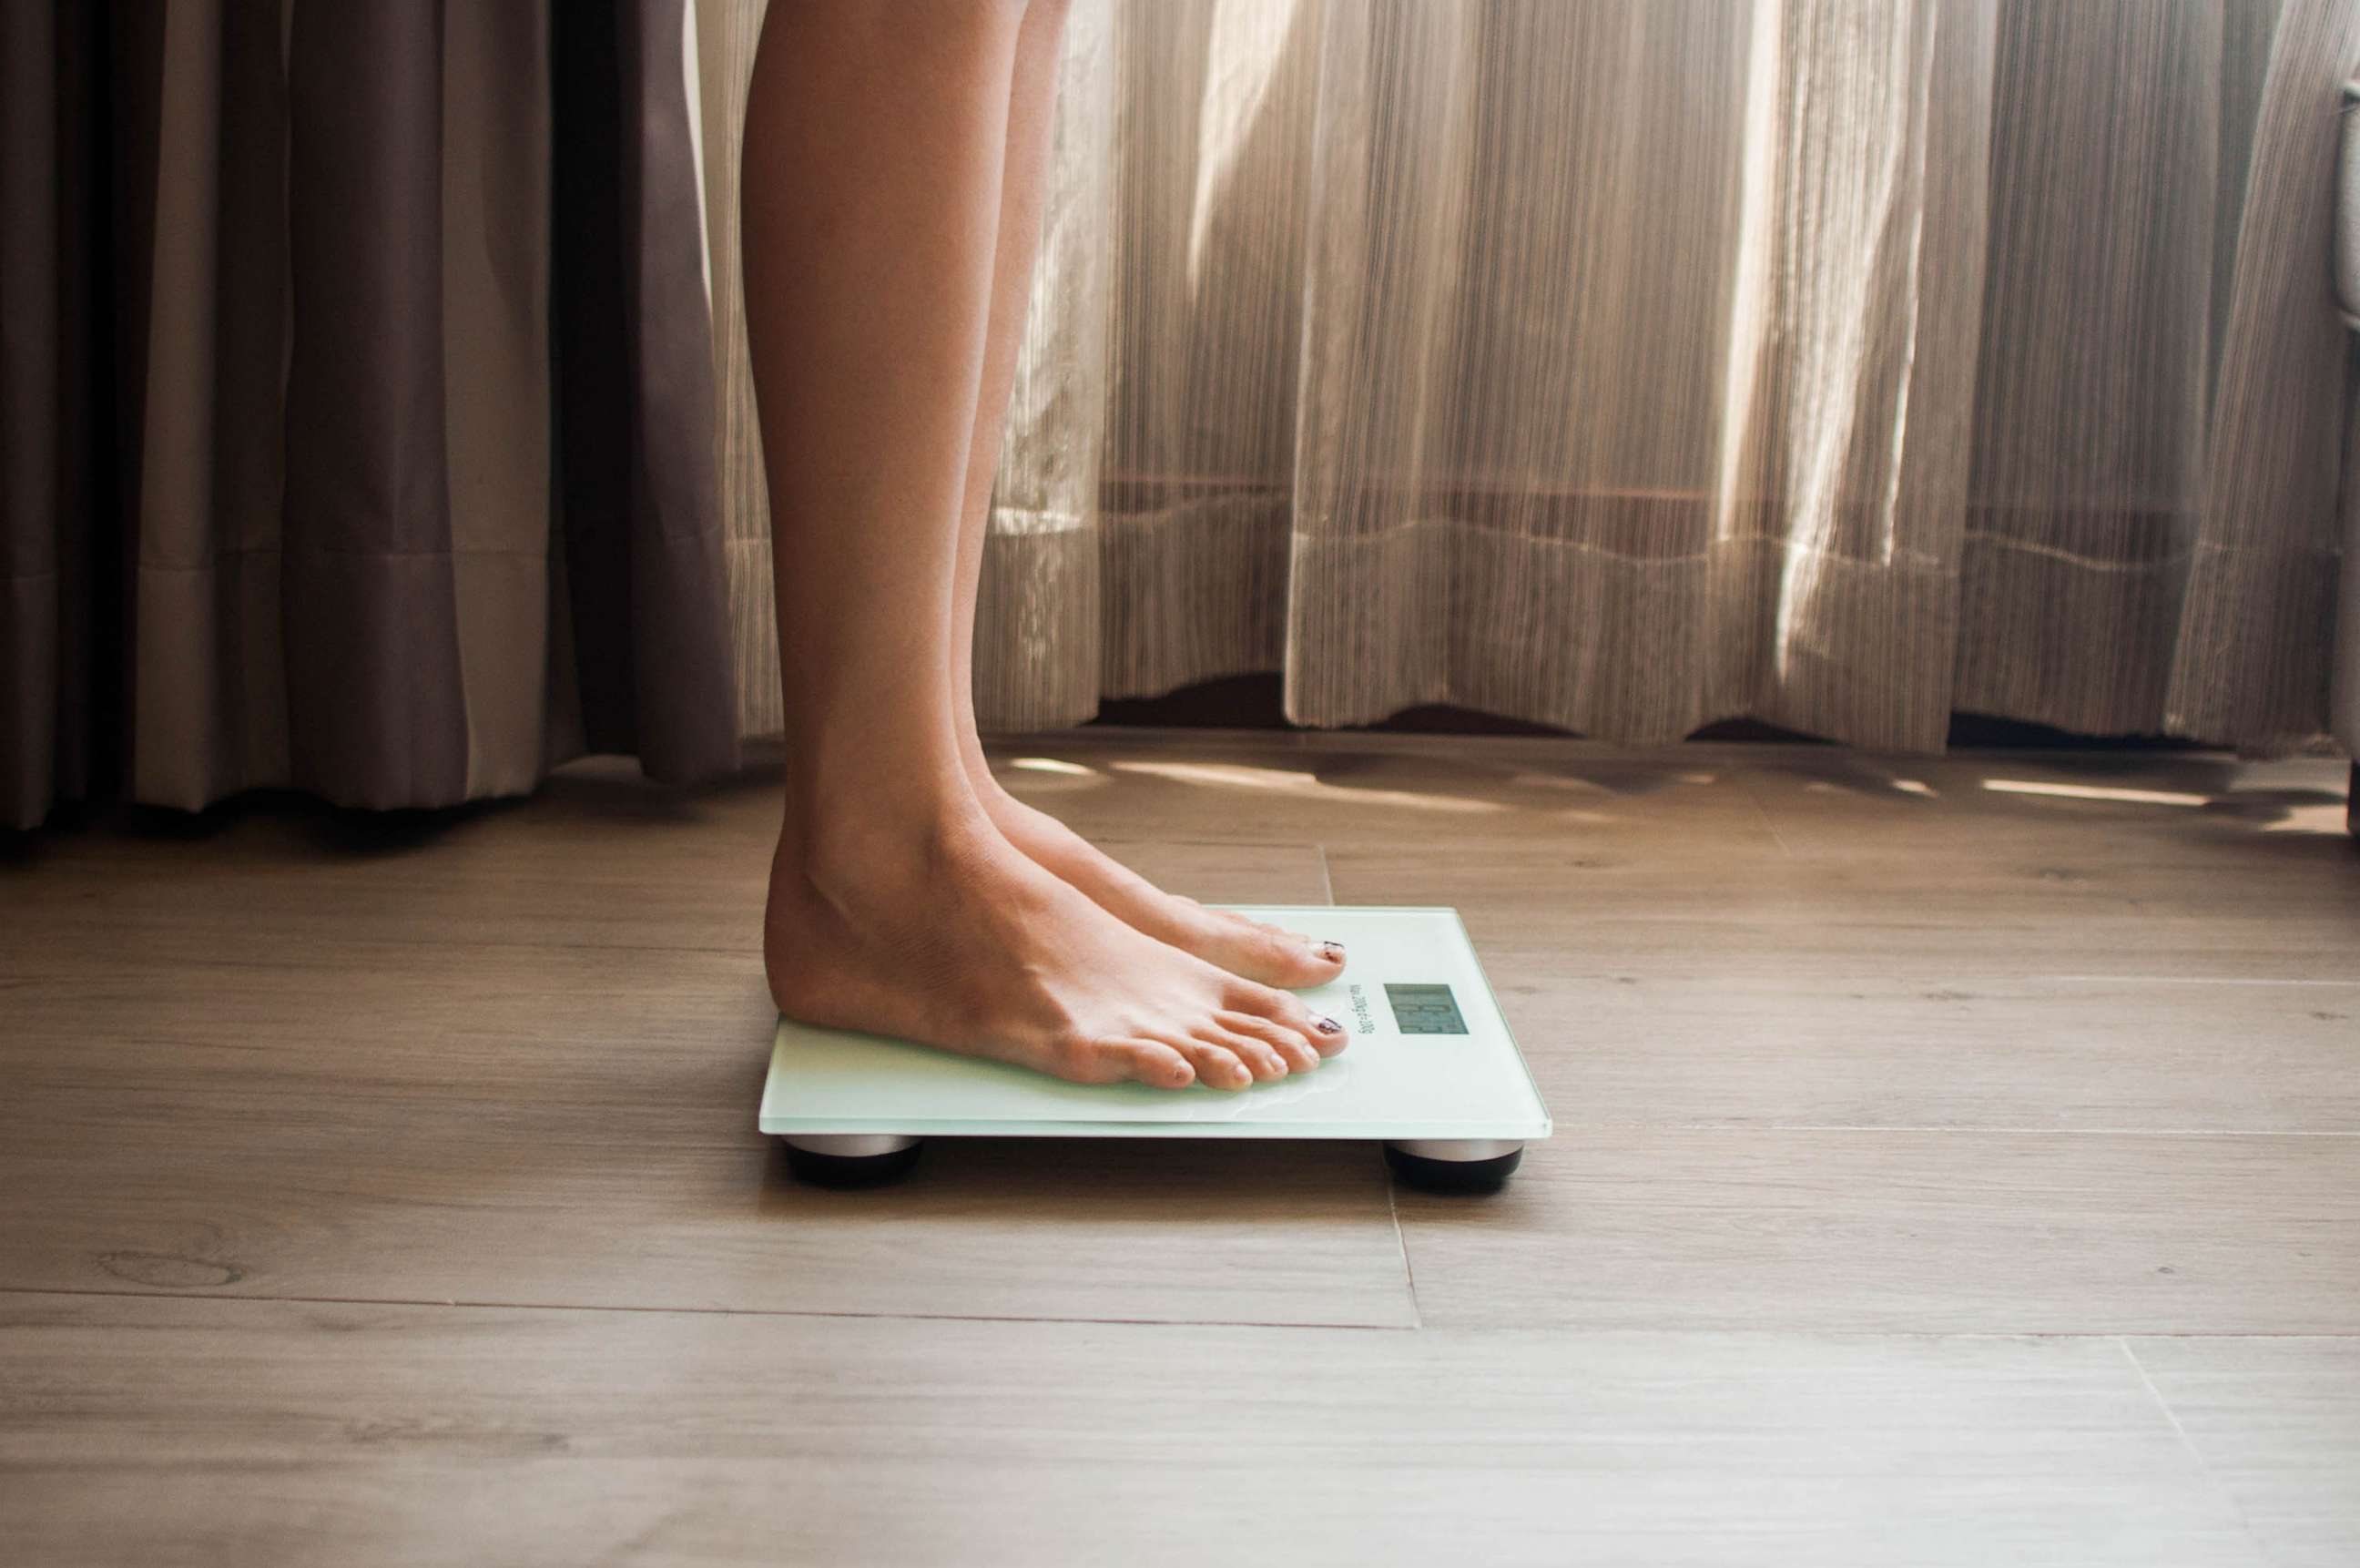 STOCK PHOTO: A woman on a weighing scale